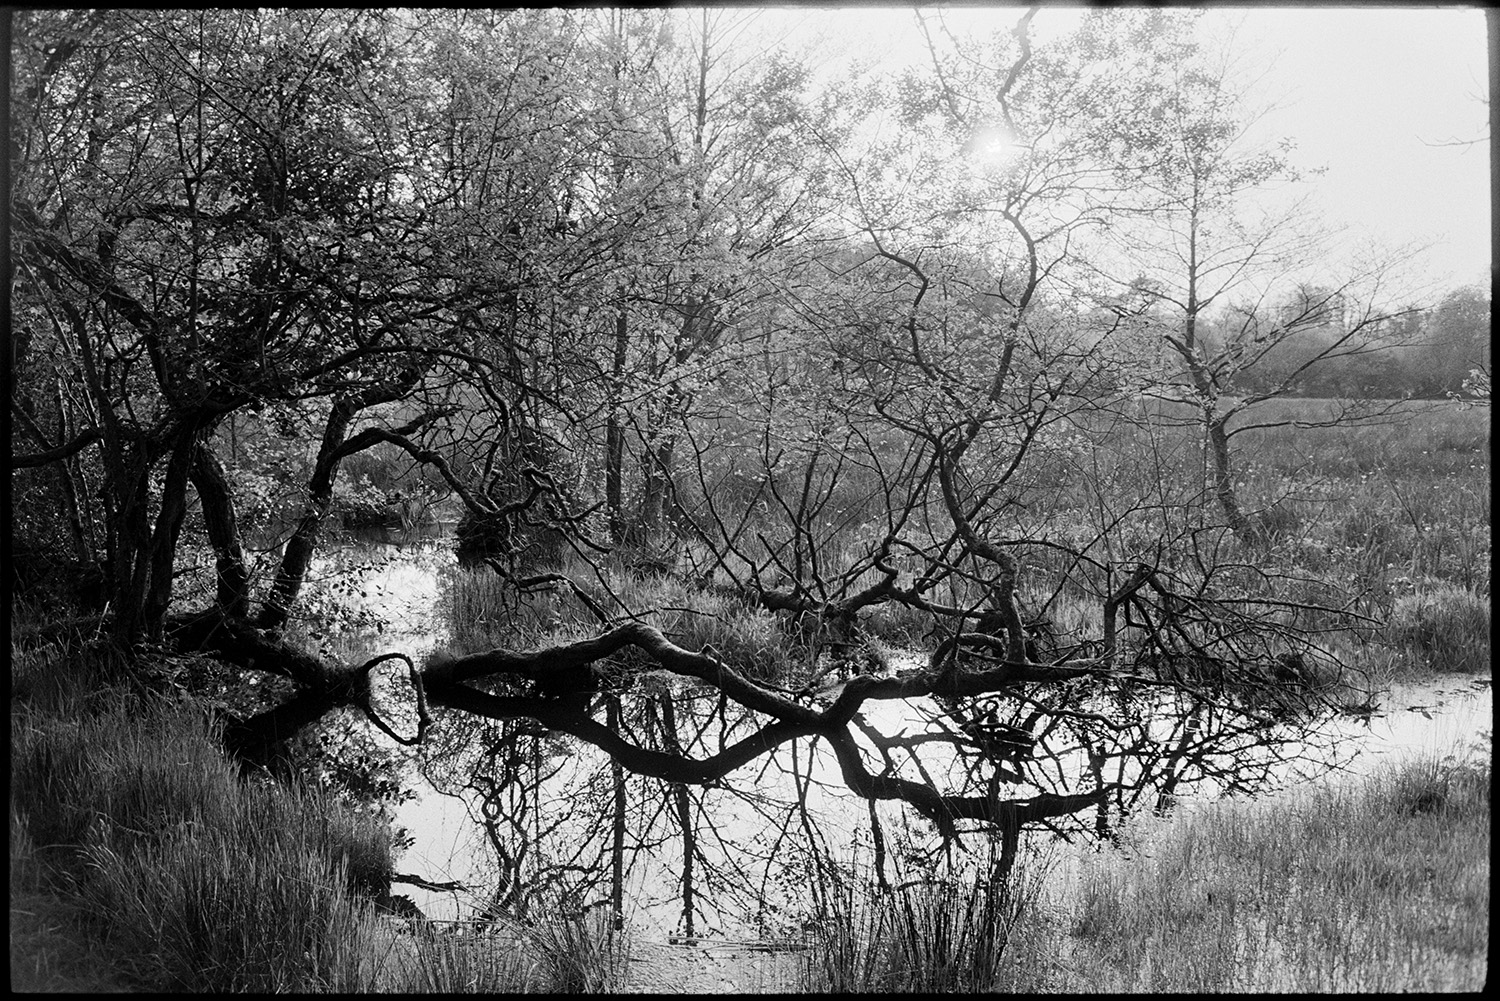 Wetlands with trees and pond.
[Wetlands with fallen trees, branches and reeds at Halsdon, Dolton. Reflections of the trees can be seen on the water.]